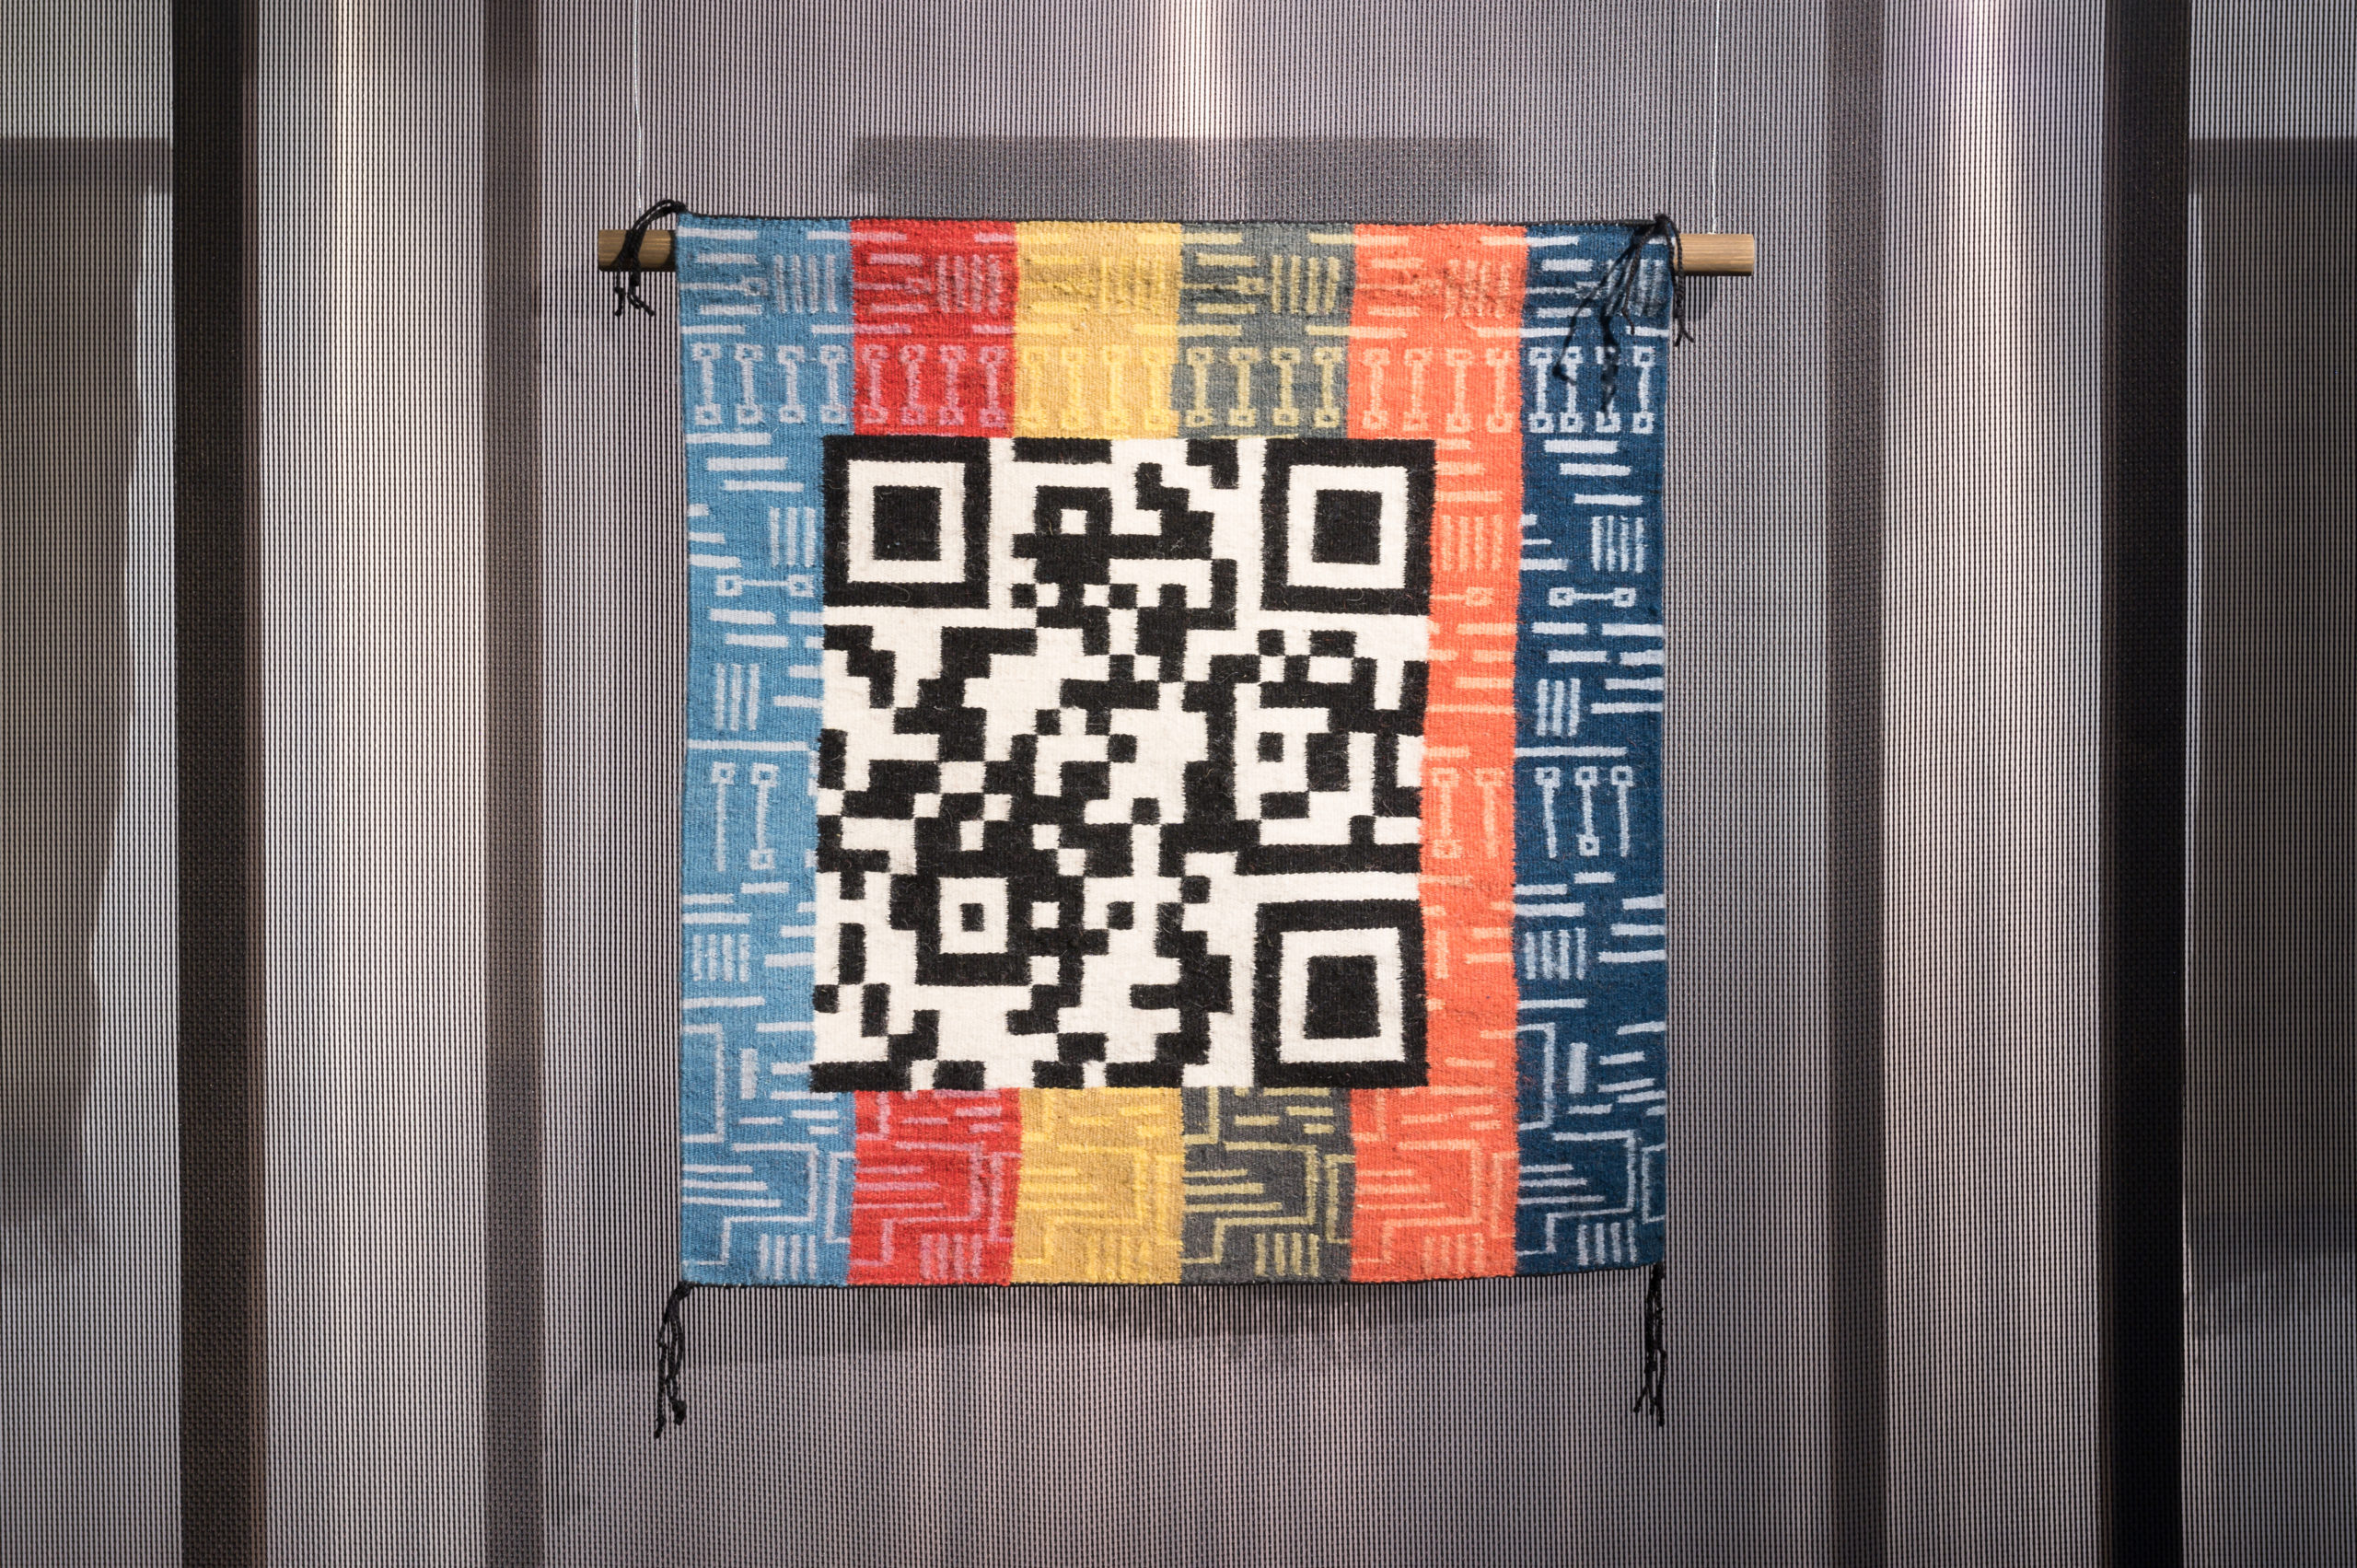 Marilou Schultz, Navajo Weavings’ Lens Through Technology (2022), tapestry, 69,85 x 63,5 cm. Courtesy the artist. Loan from Carl & Mailynn Thoma Foundation. Photo: Daniel Vincent Hansen. In the exhibition Unweaving the binary code at Kunsthall Trondheim as part of the 3rd Hannah Ryggen Triennale, 2022.